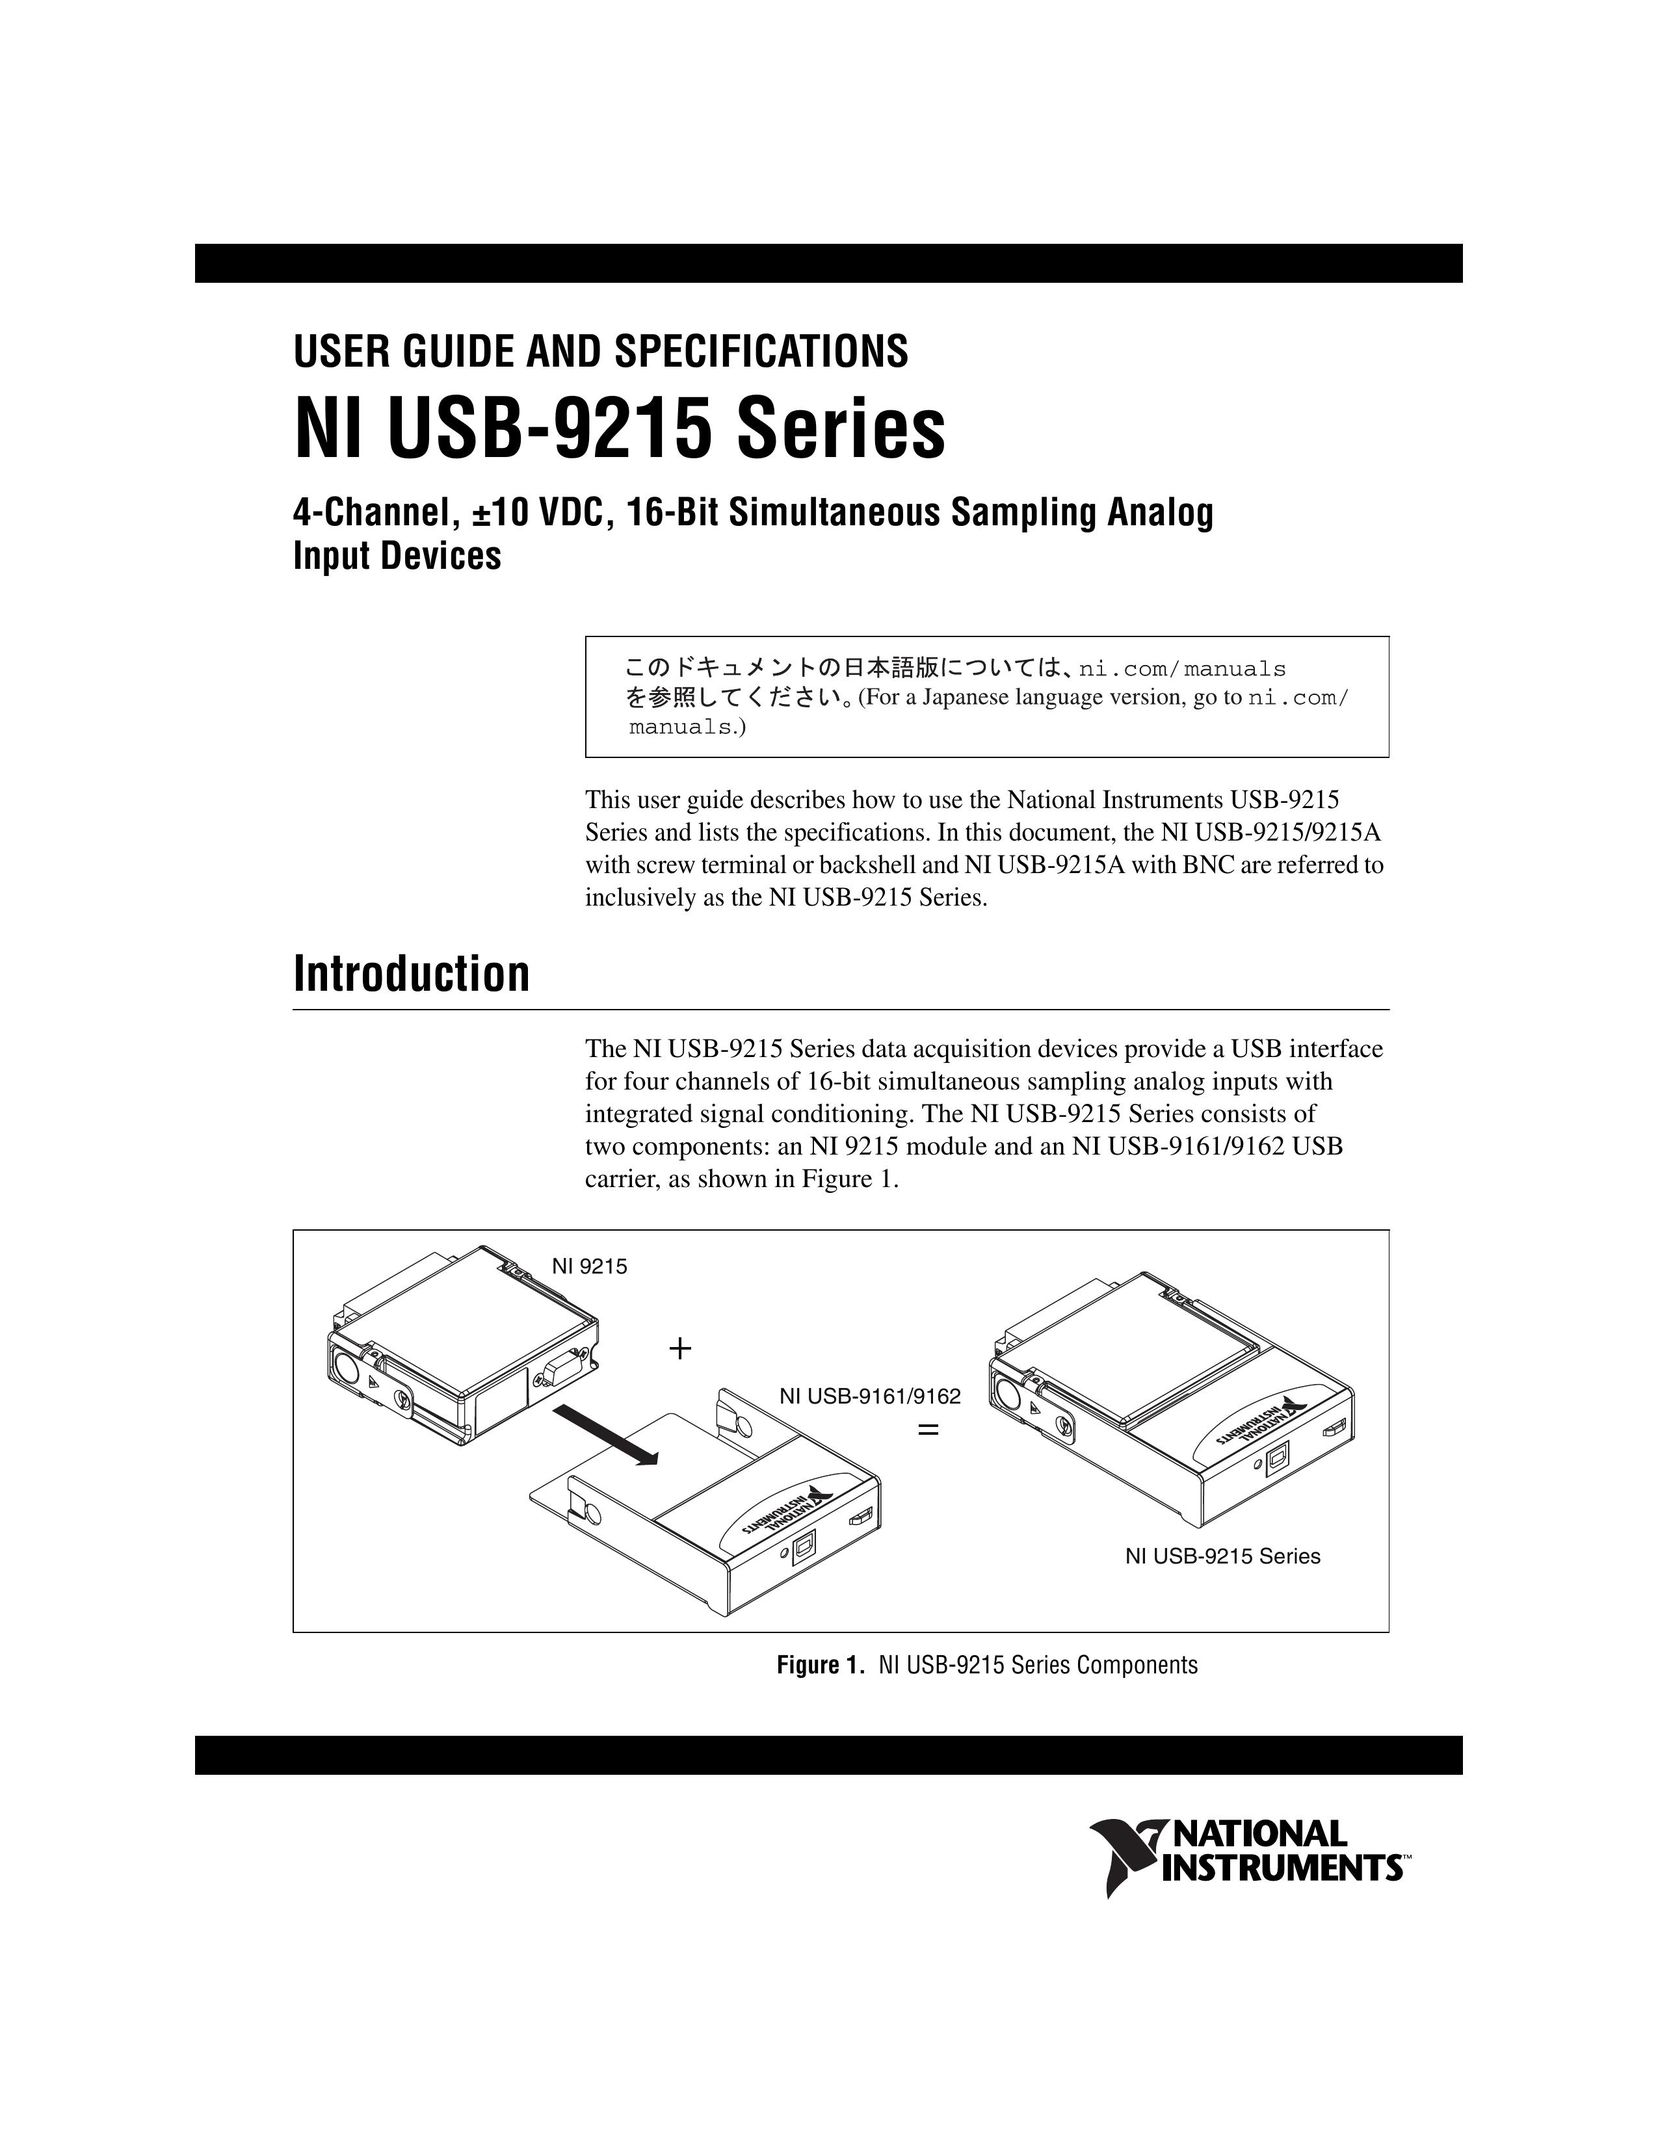 National Instruments 4-Channel, +_ VDC, 16-Bit Simultaneous Sampling Analog Input Devices Computer Hardware User Manual